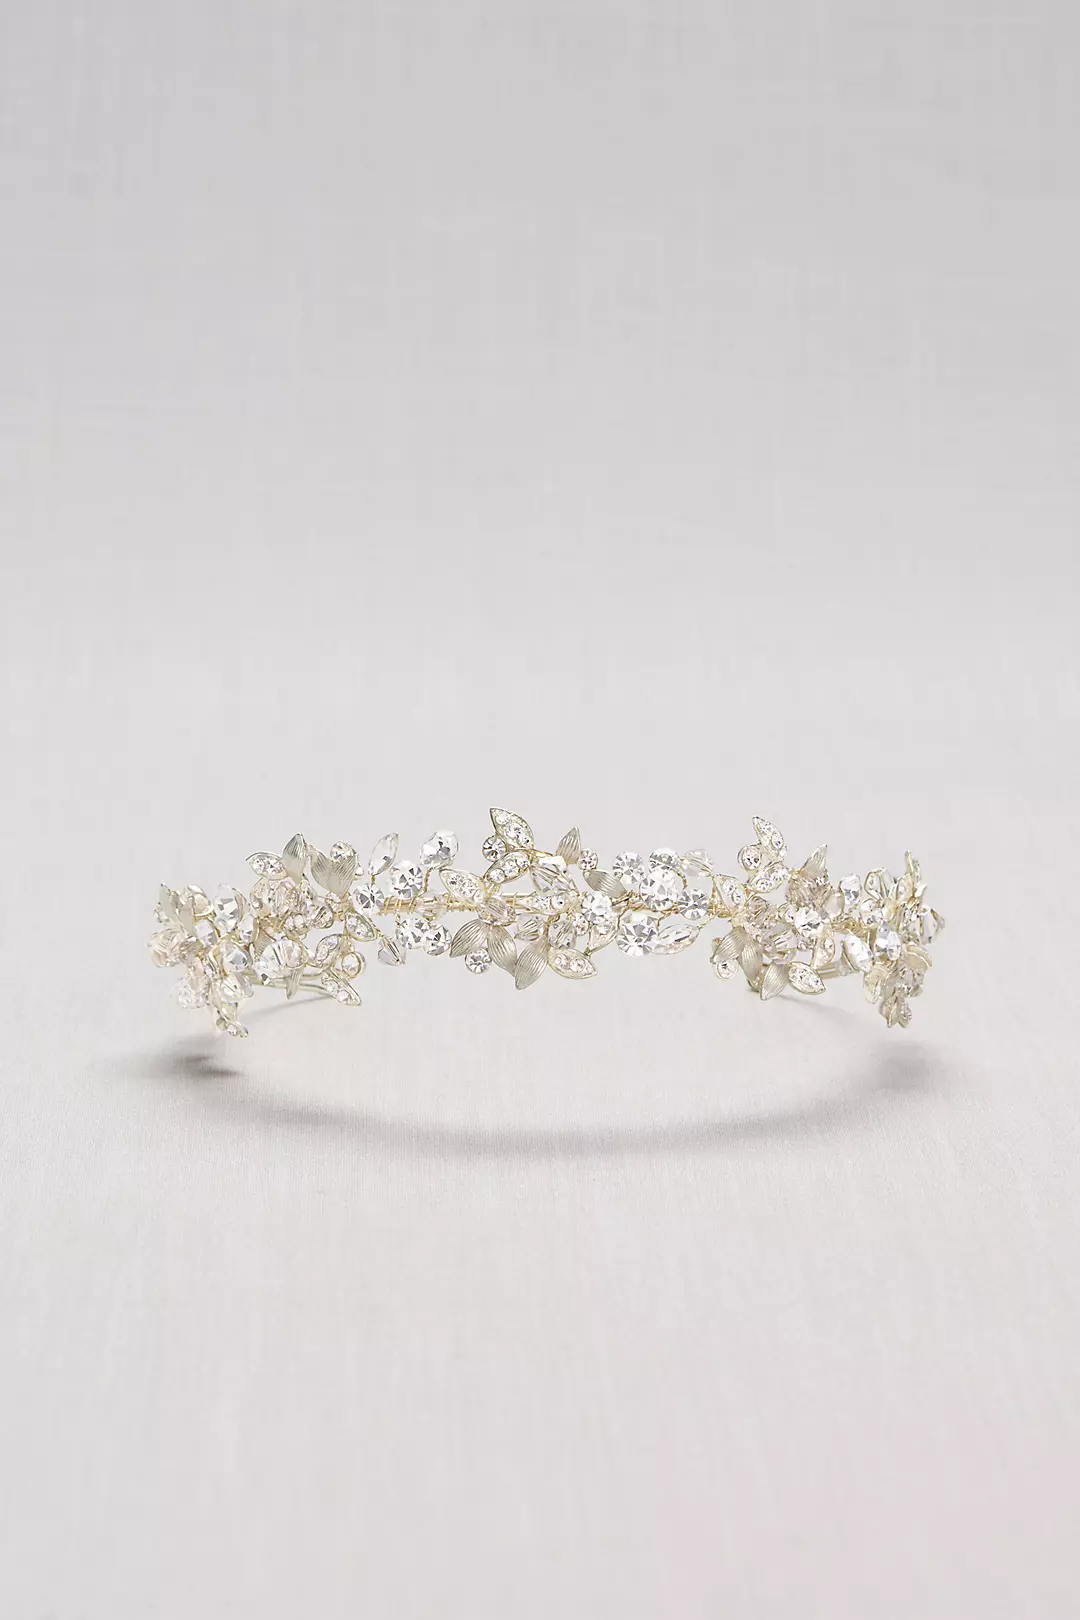 Crystal Petals and Clustered Leaves Headband Image 2